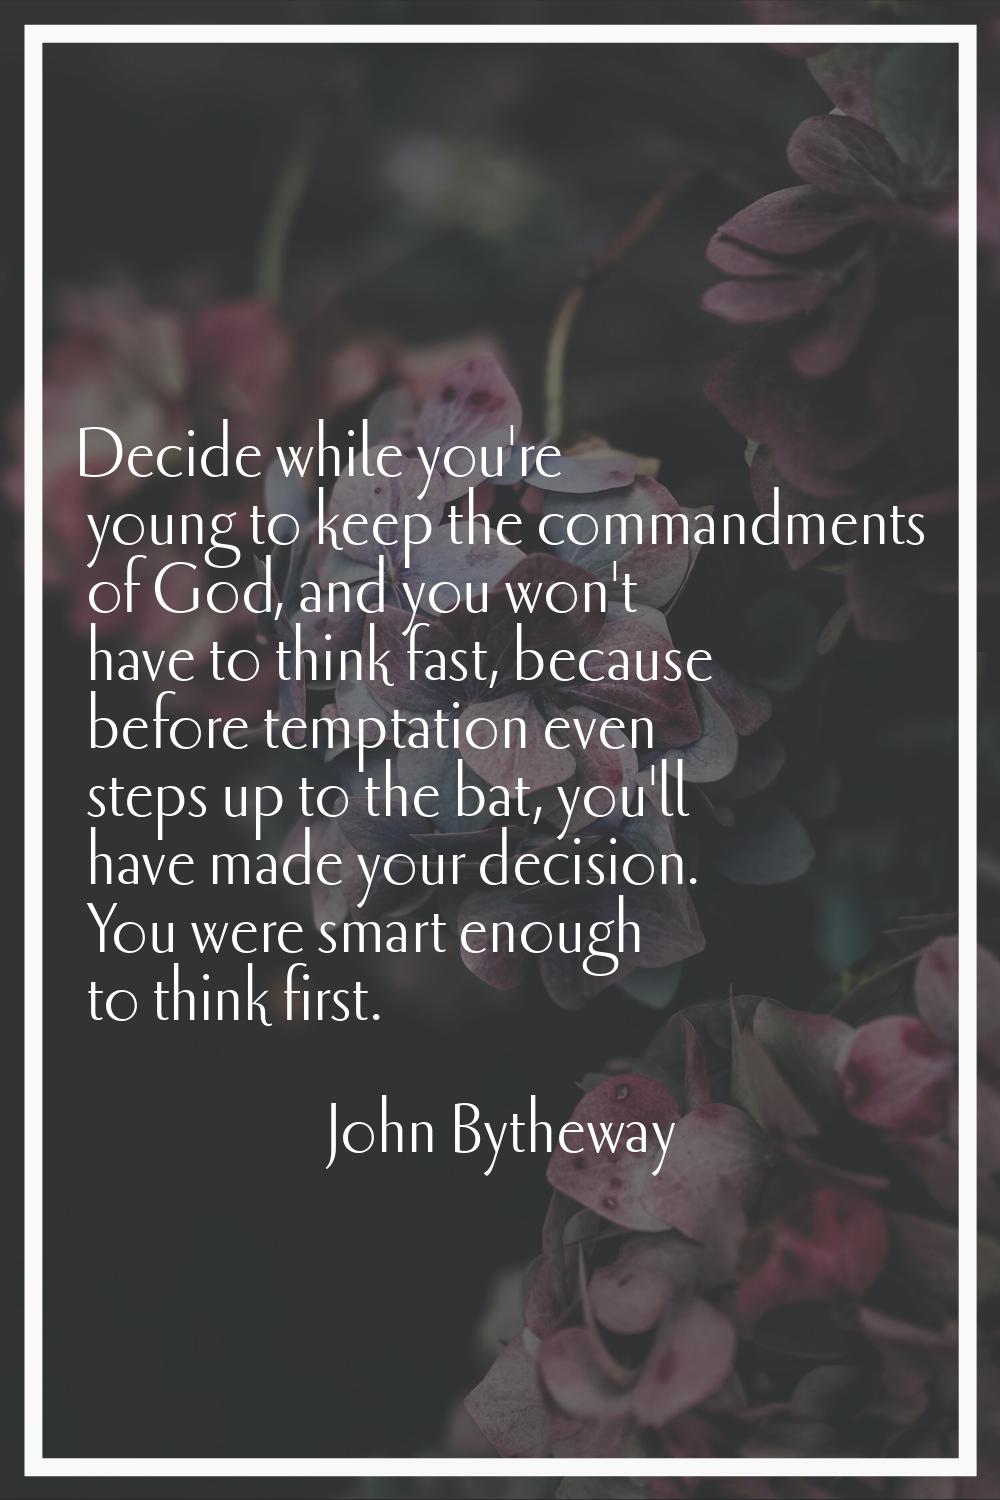 Decide while you're young to keep the commandments of God, and you won't have to think fast, becaus